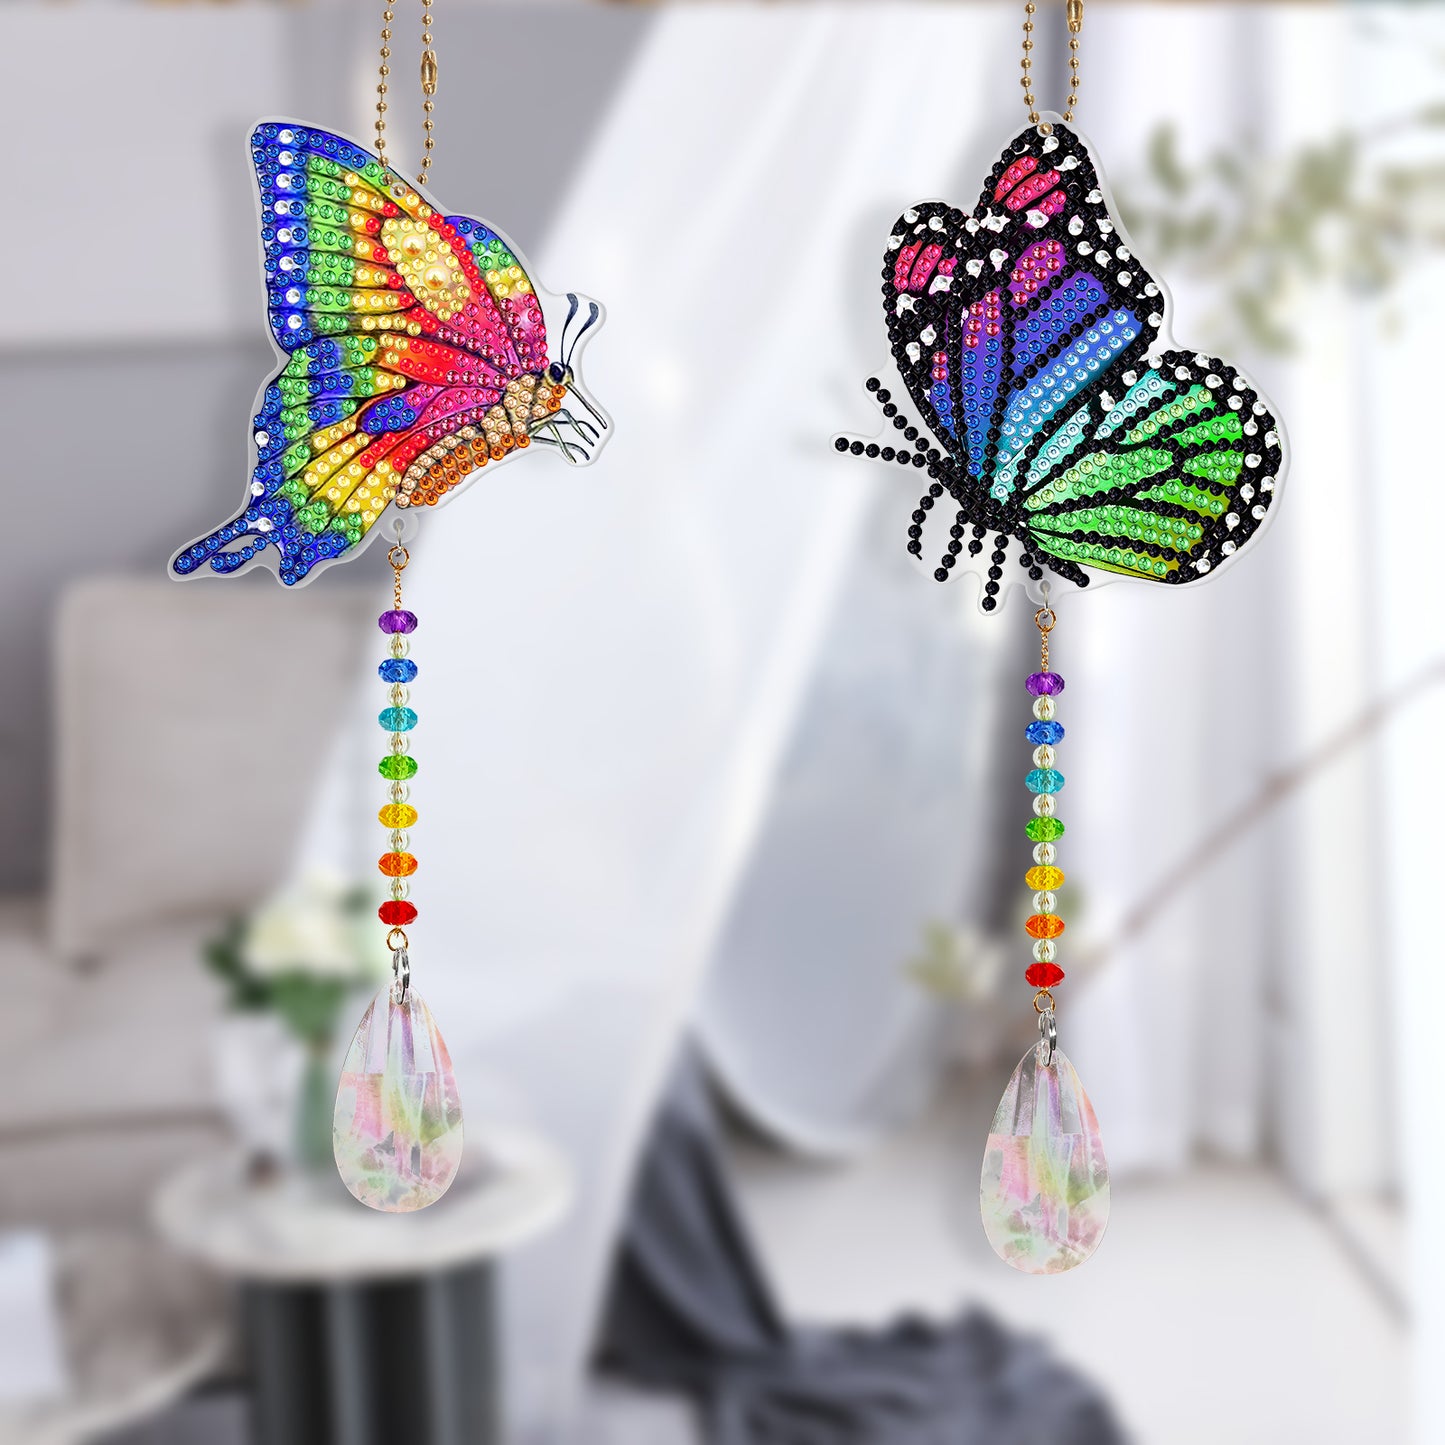 Diamond Painting Prisms Hanging Rainbow | Butterfly | Double Faced Diamonds 2pcs